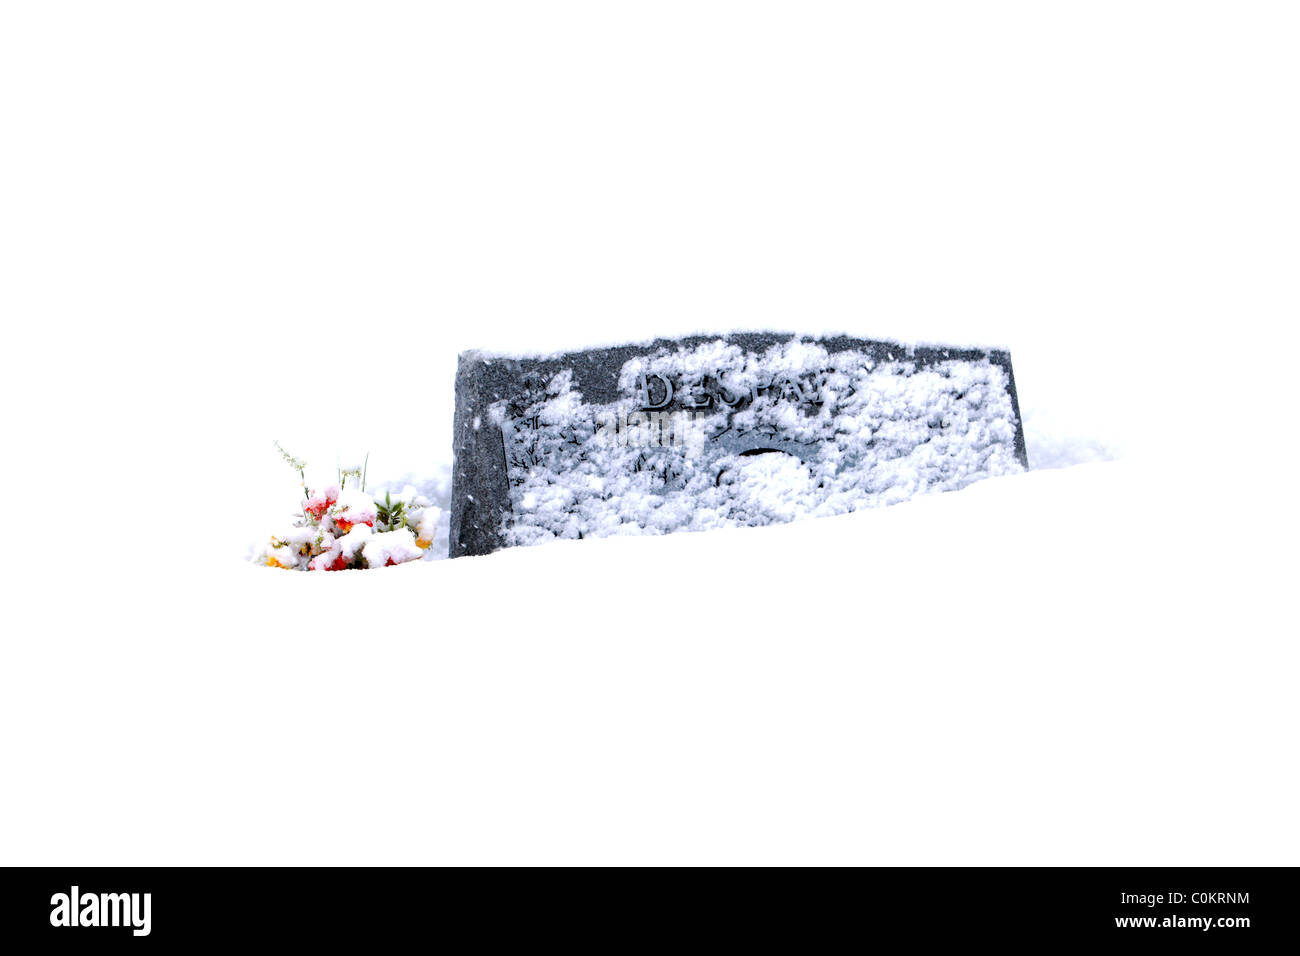 Headstone buried snow in cemetery with bright flowers in deep white snow. Winter season giving a religious and cold overtone. Stock Photo